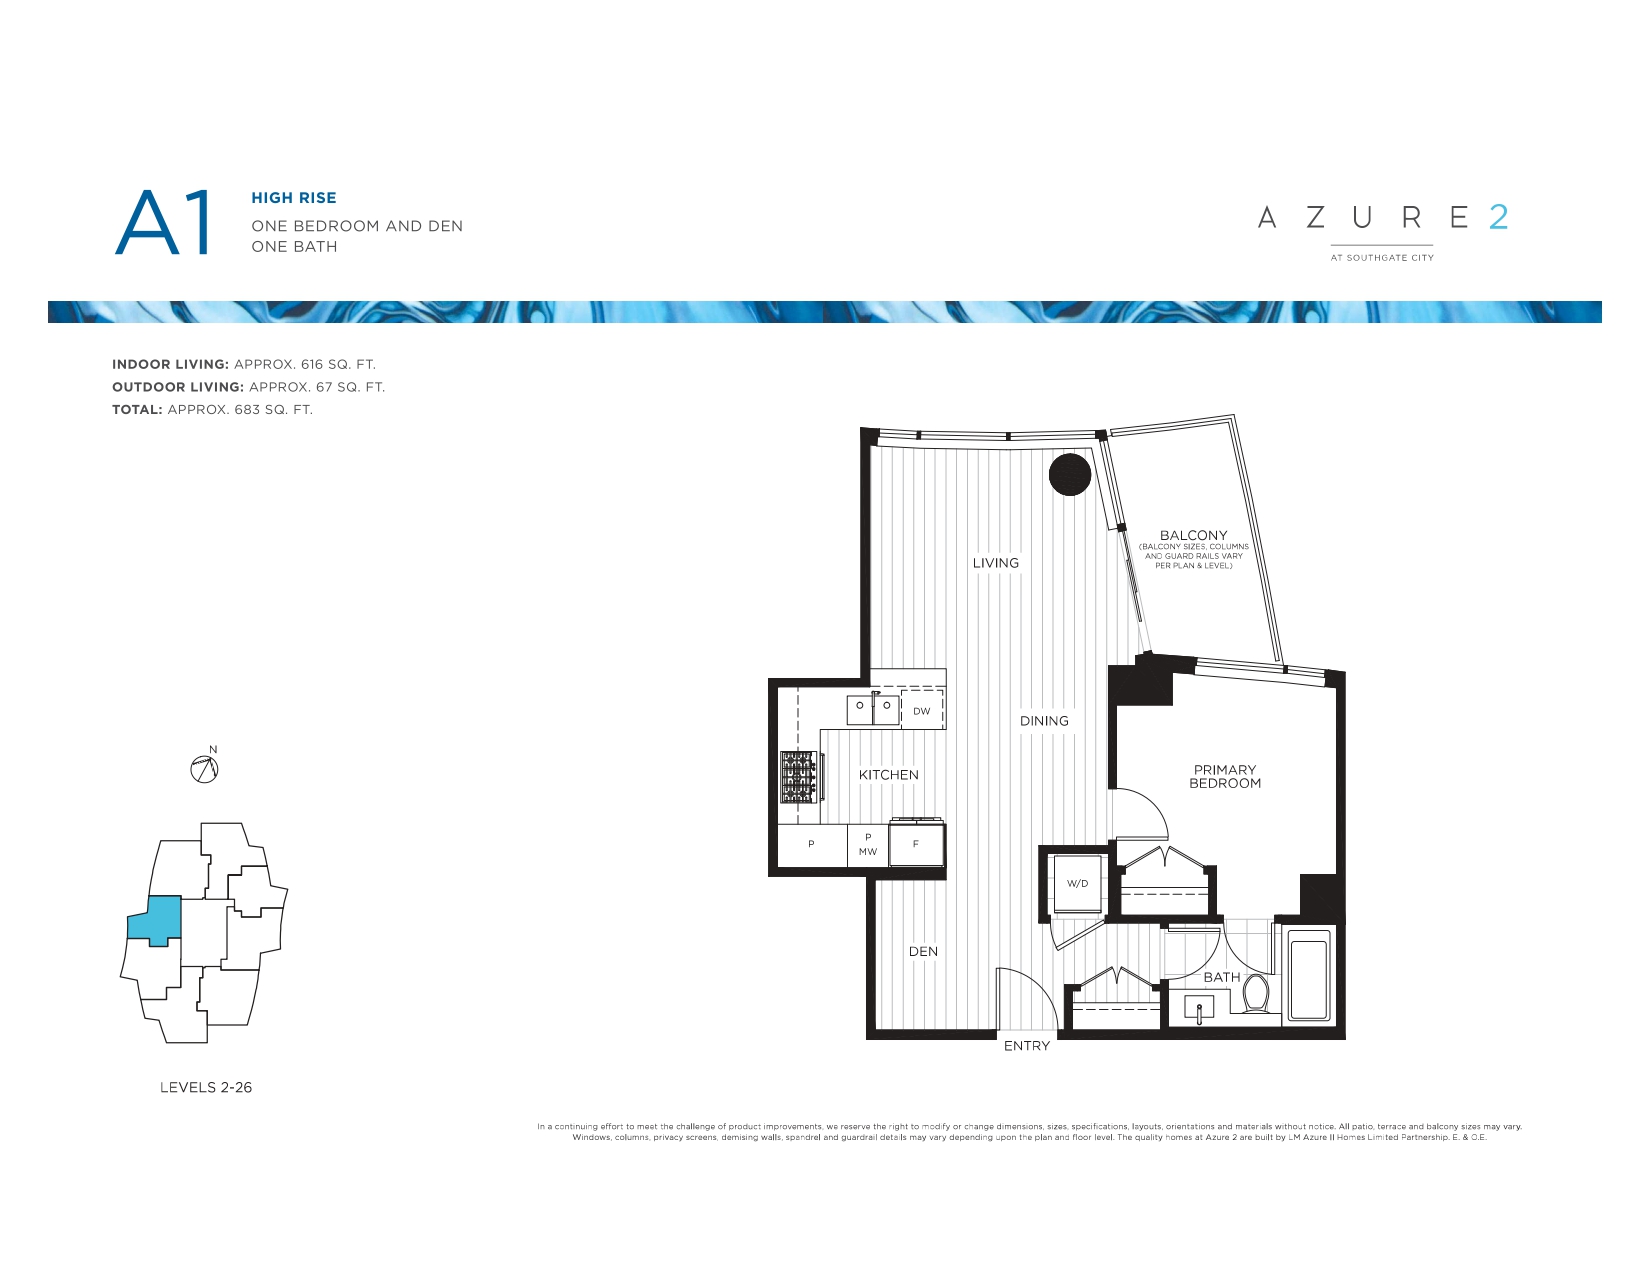 A1 Floor Plan of Azure 2 Condos with undefined beds